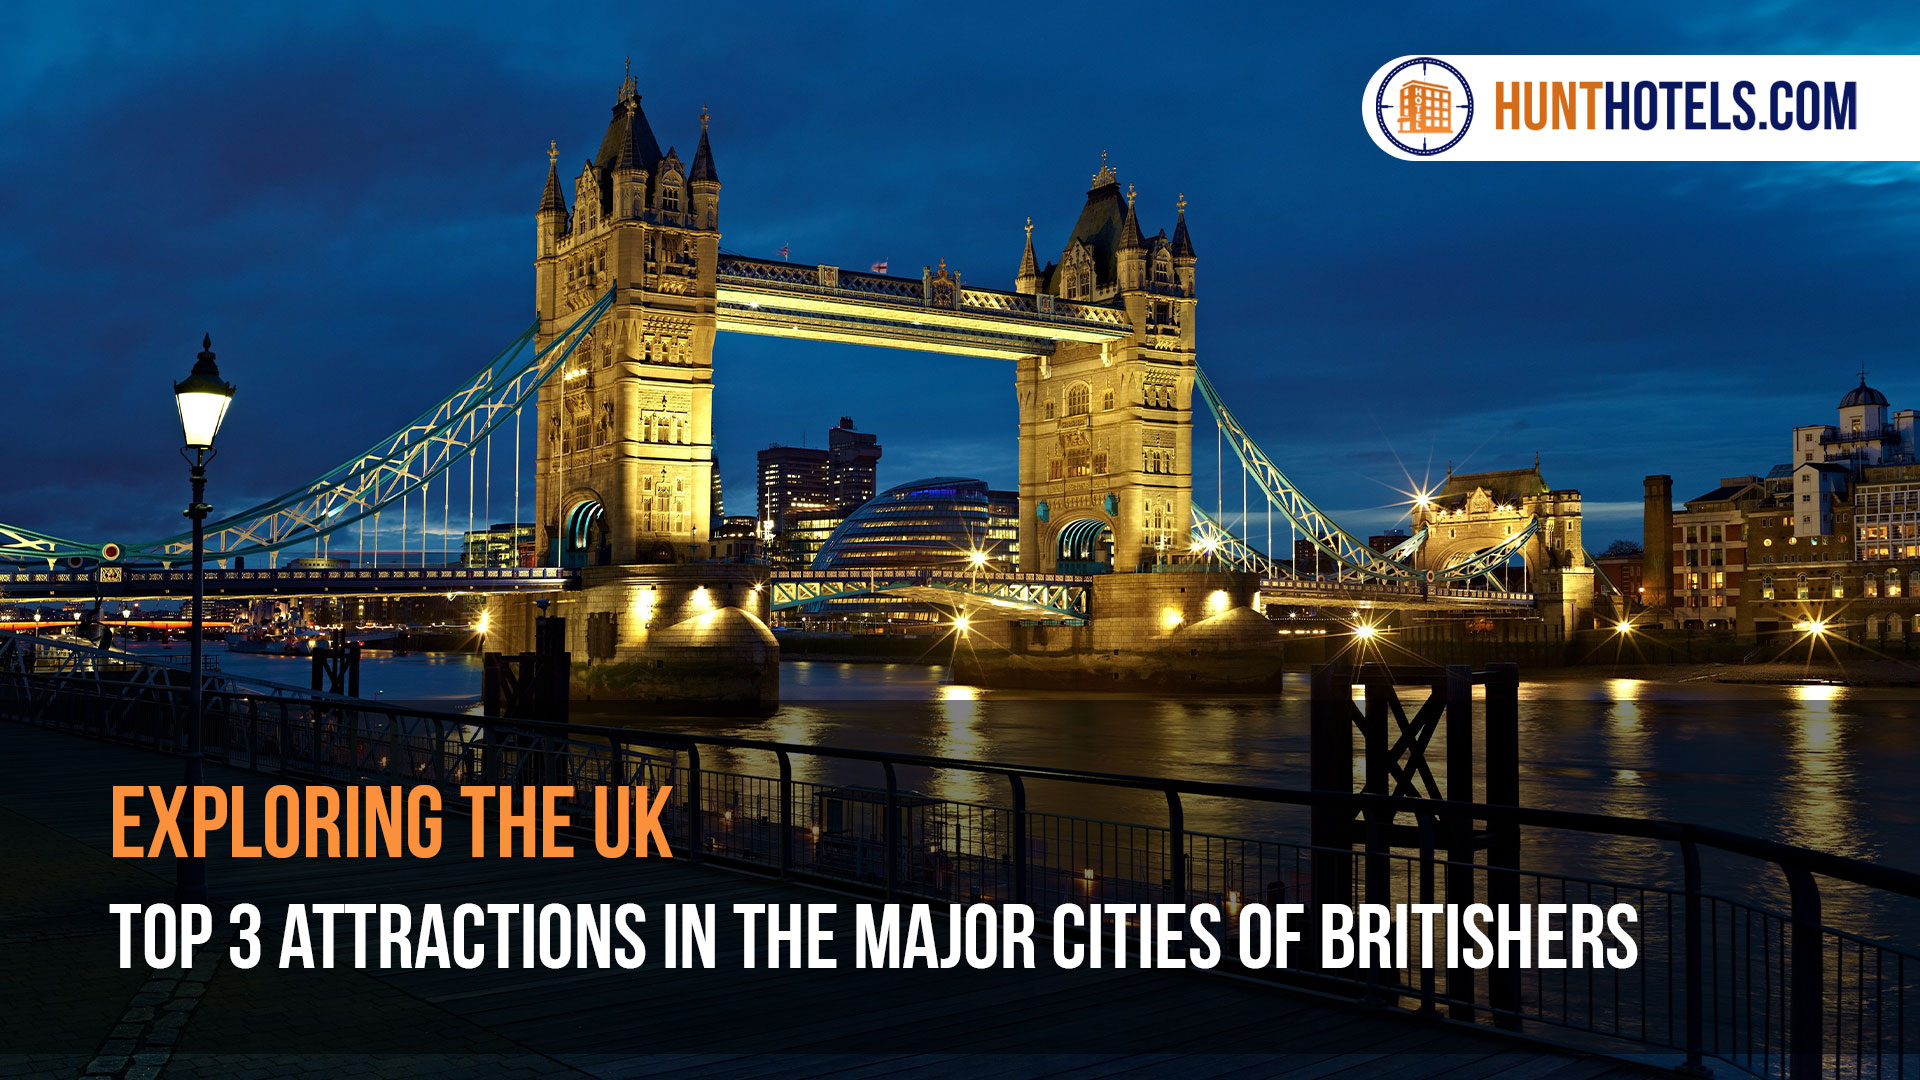 Top 3 attractions in the major cities of Britishers